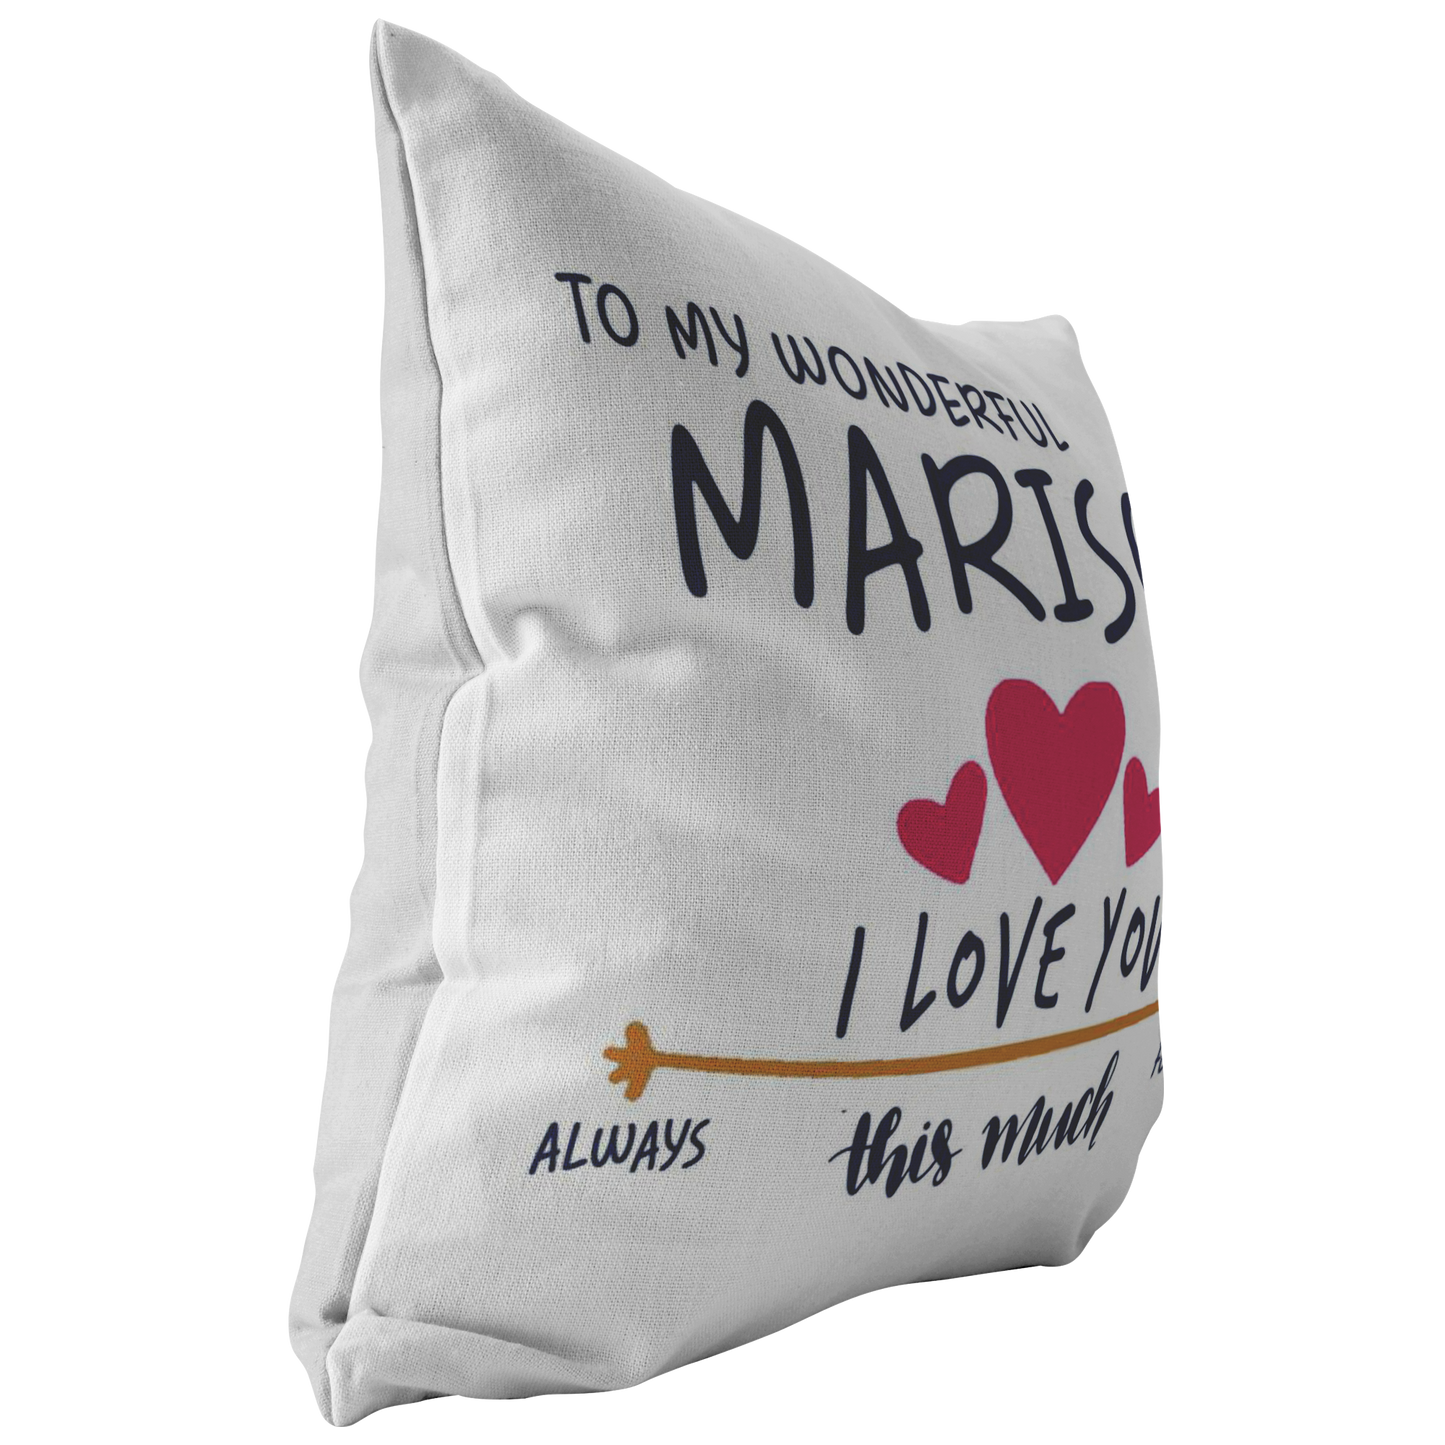 PL-21251231-sp-29997 - [ Marisol | 1 | 1 ] (PI_ThrowPillowCovers) Valentines Day Pillow Covers 18x18 - to My Wonderful Marisol